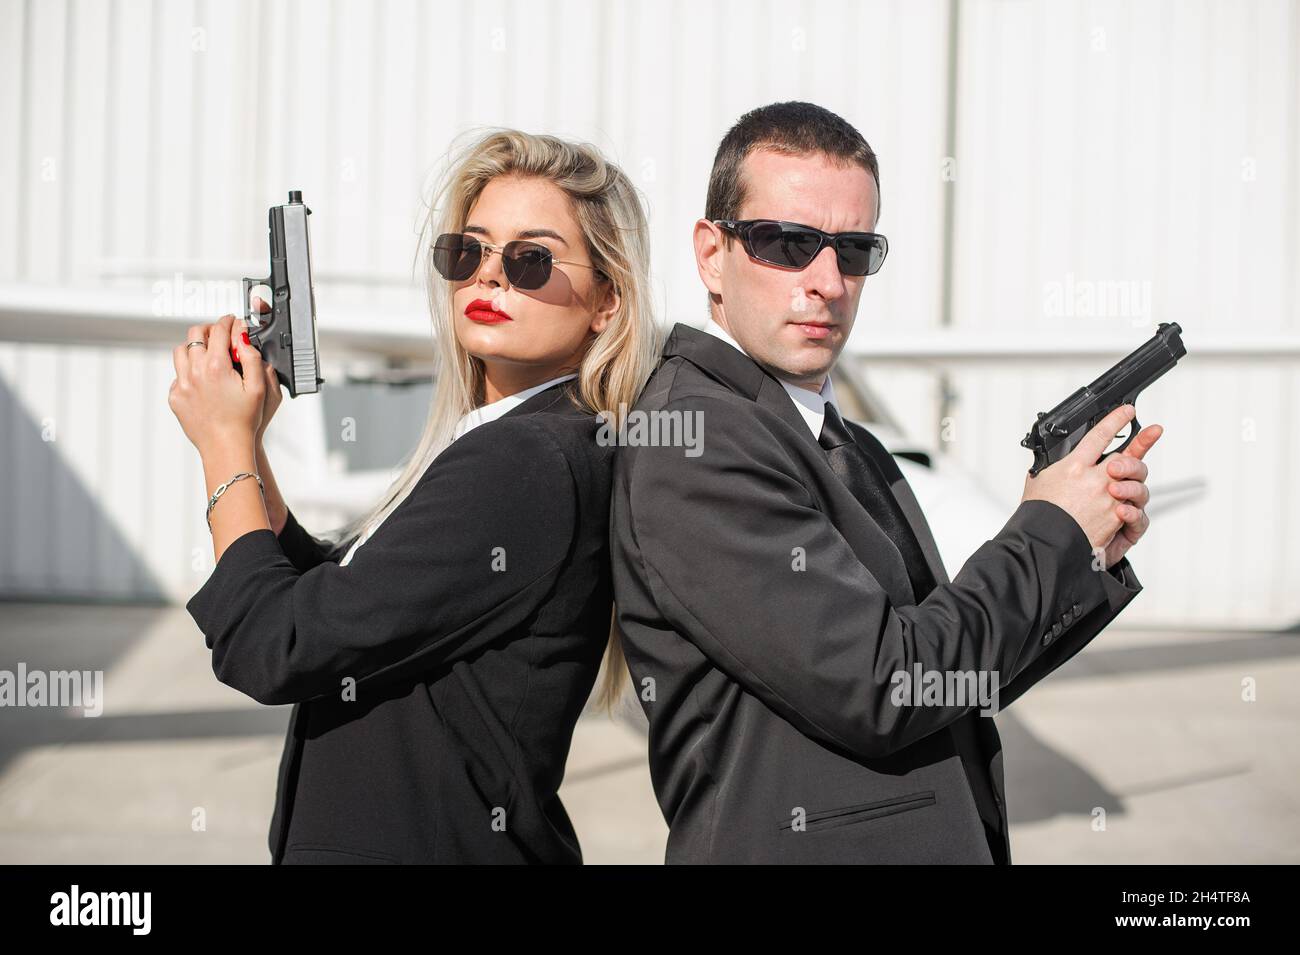 Professional female and male spy agent bodyguards posing with guns. Security police team in civilian black suit with sunglasses Stock Photo